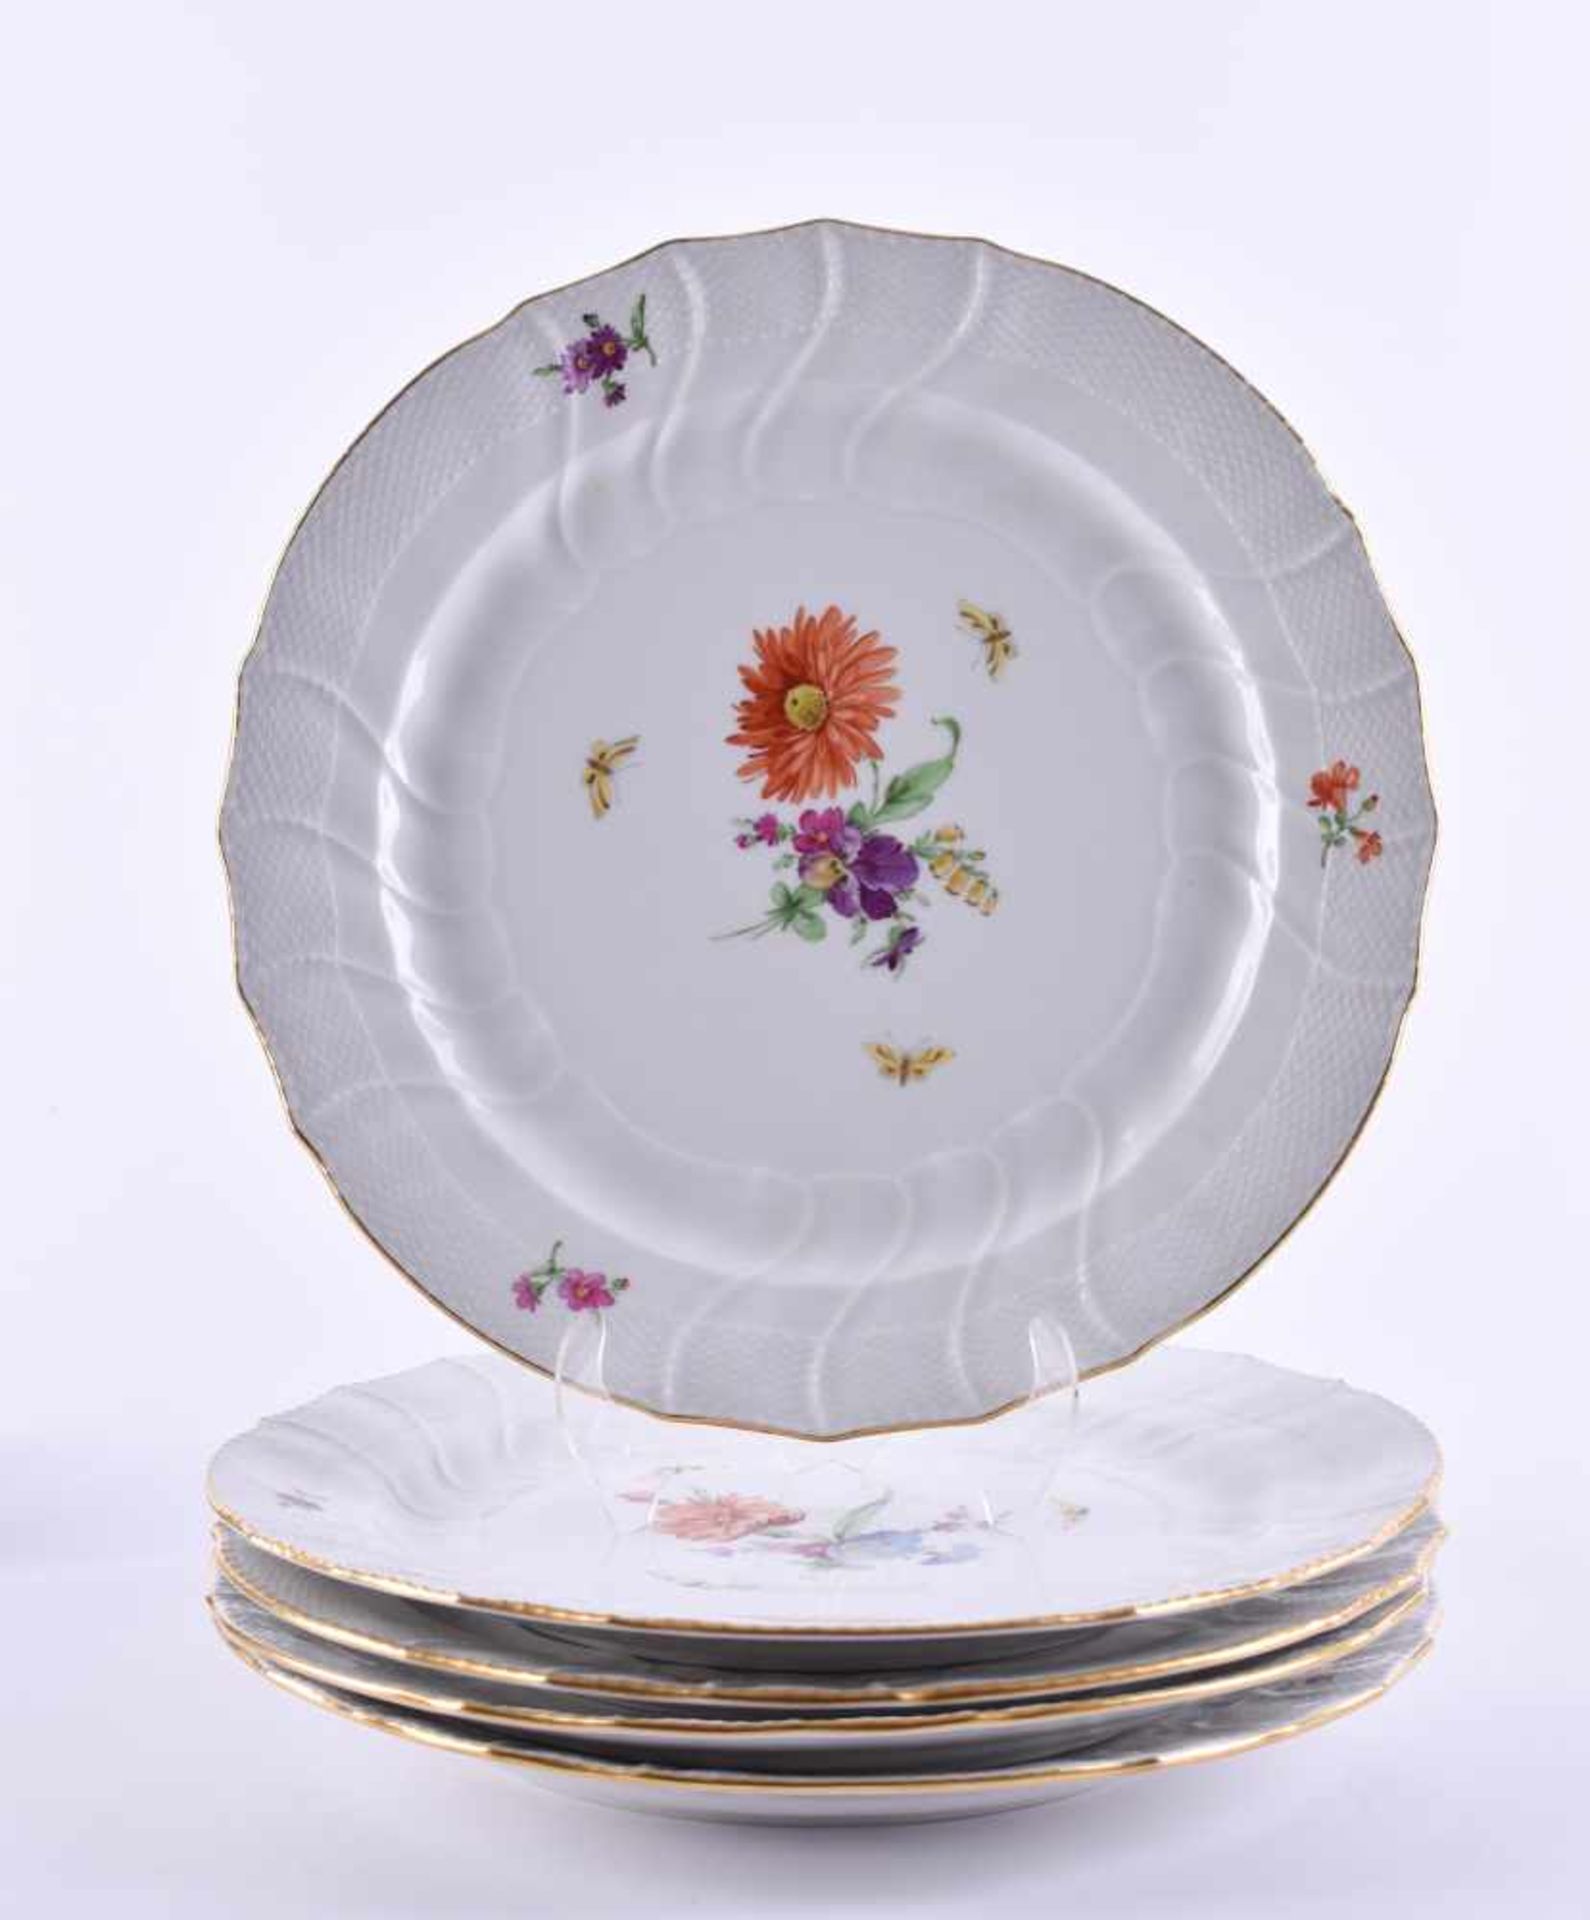 5 plates KPM Berlin 1962-1992colored and gold decorated with floral and butterfly decoration, blue